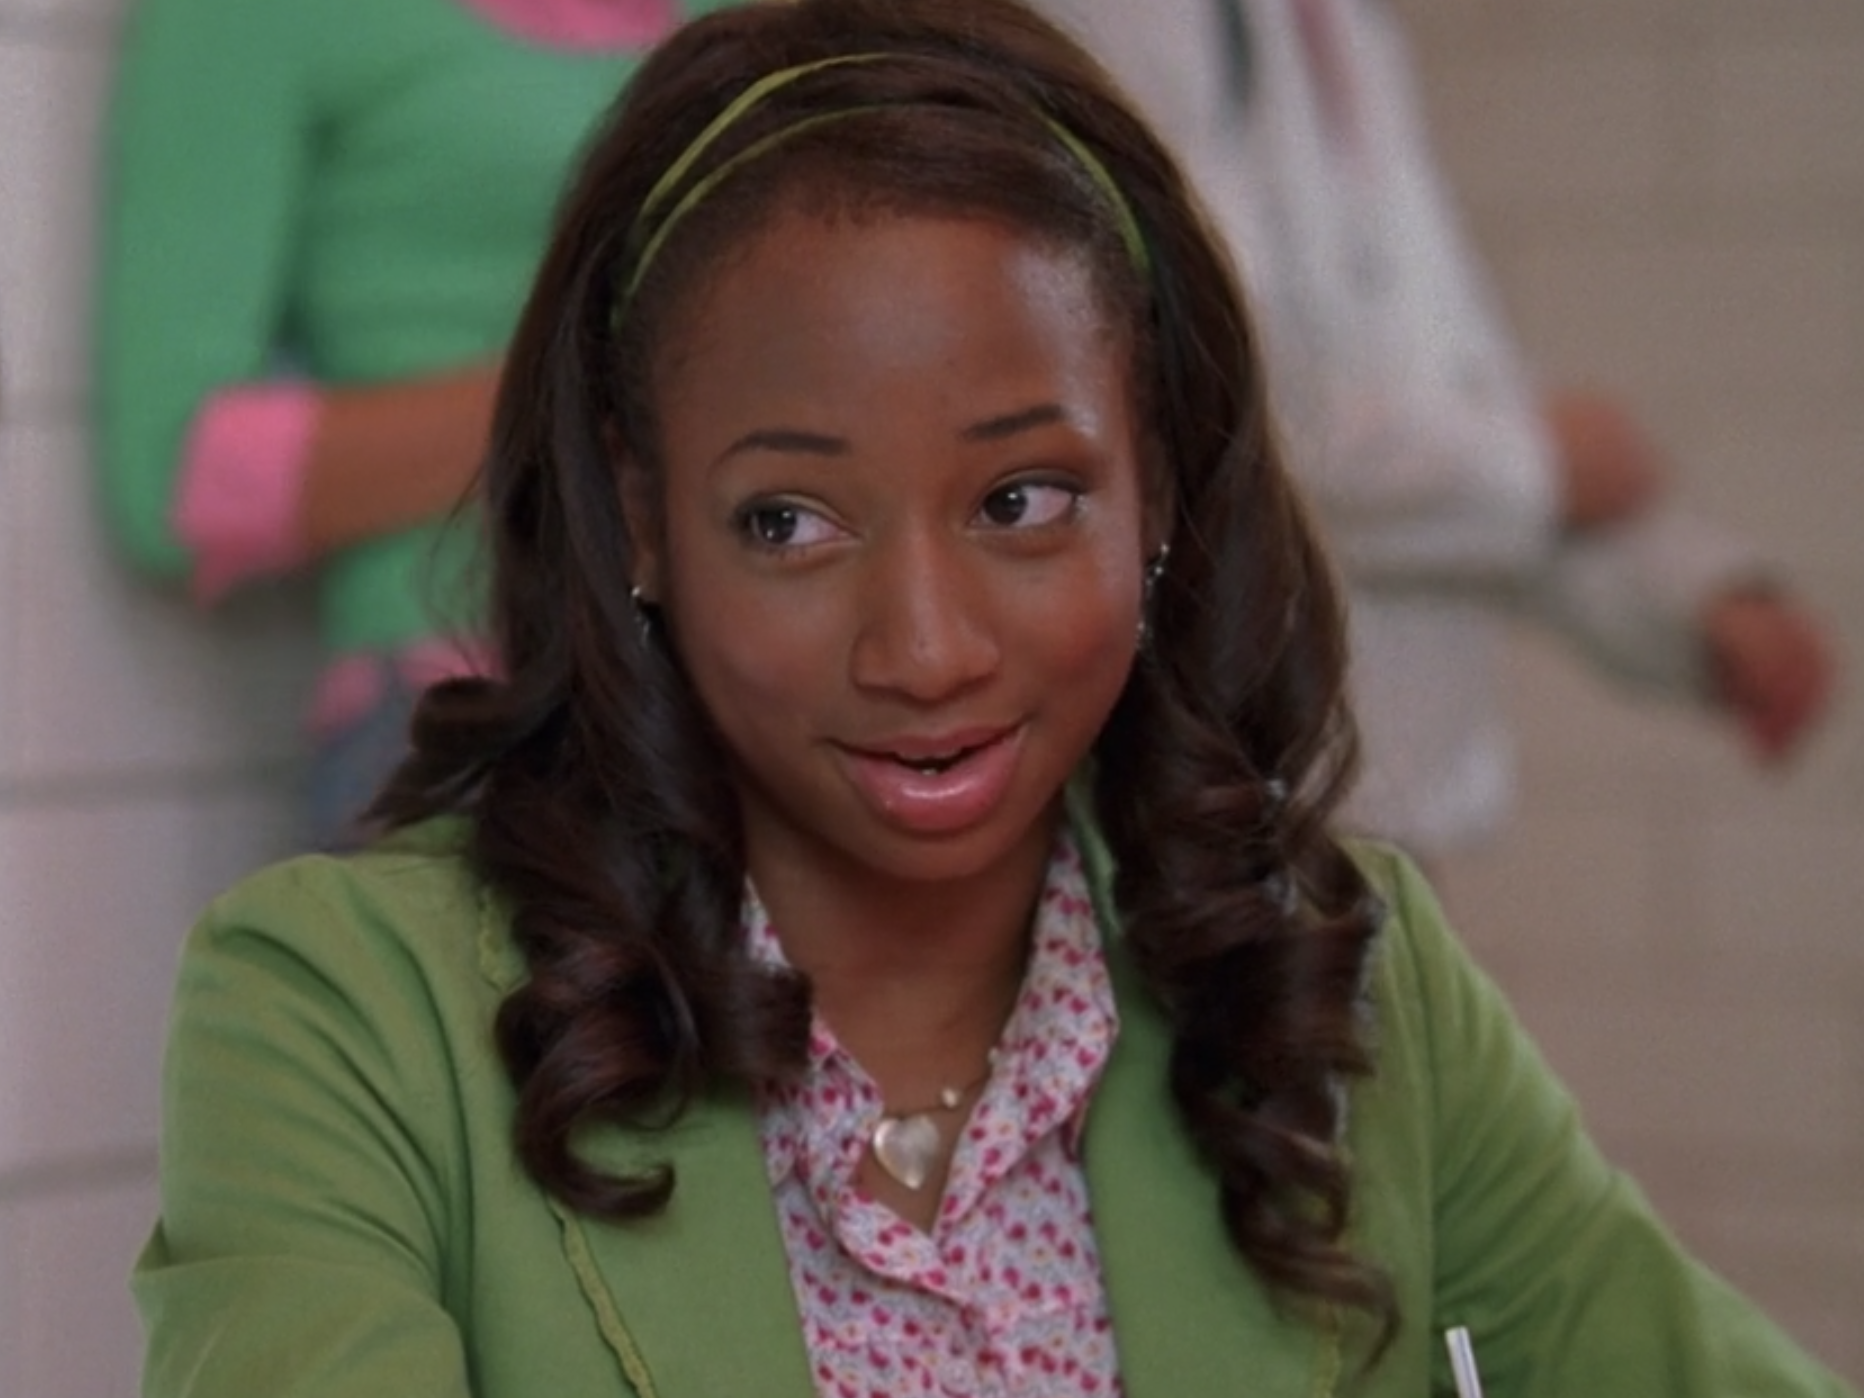 Monique Coleman: 'High School Musical' crew styled black hair 'poorly